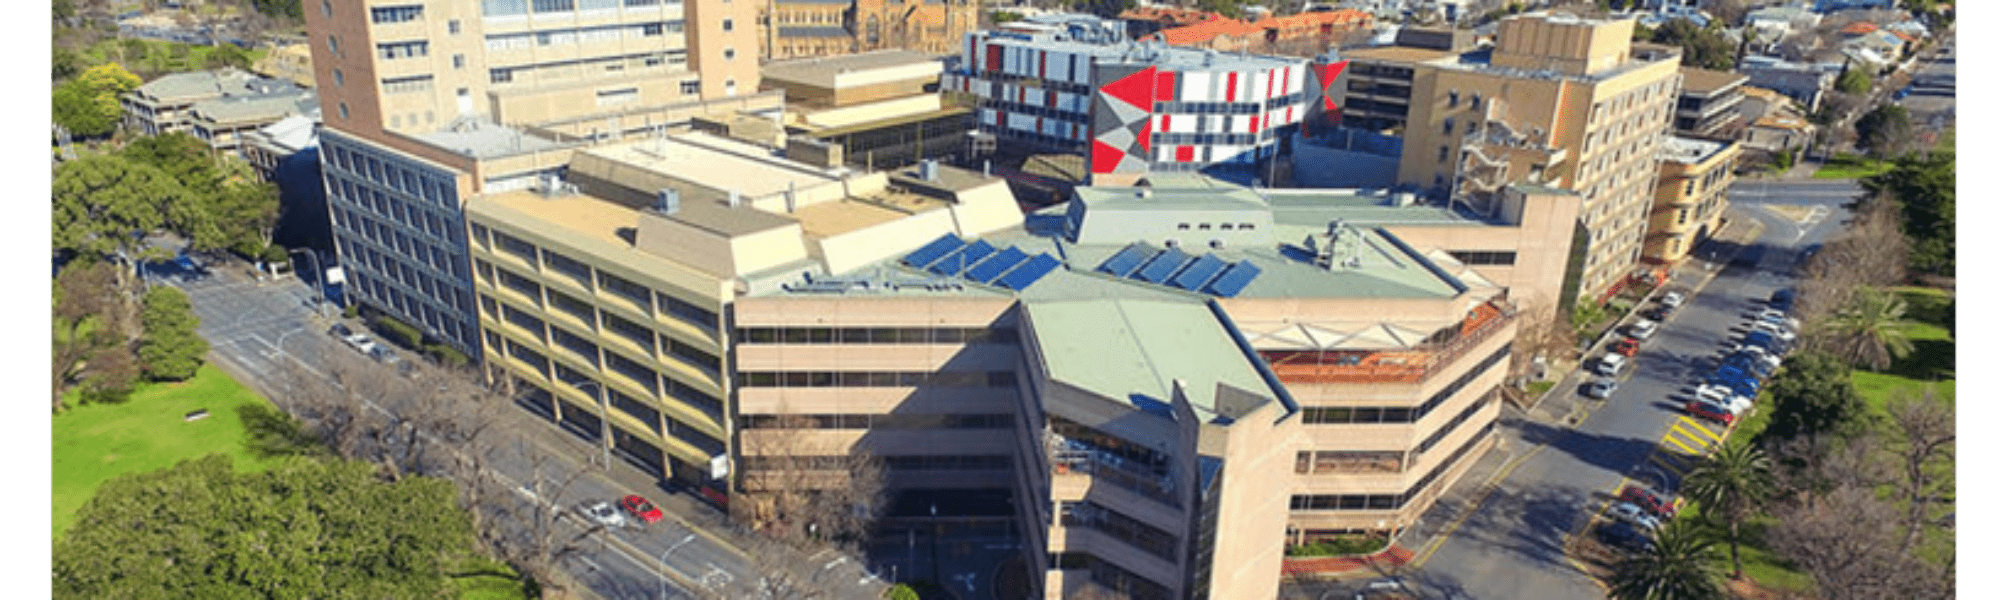 The current Women's and Children's Hospital pictured from above, in North Adelaide.